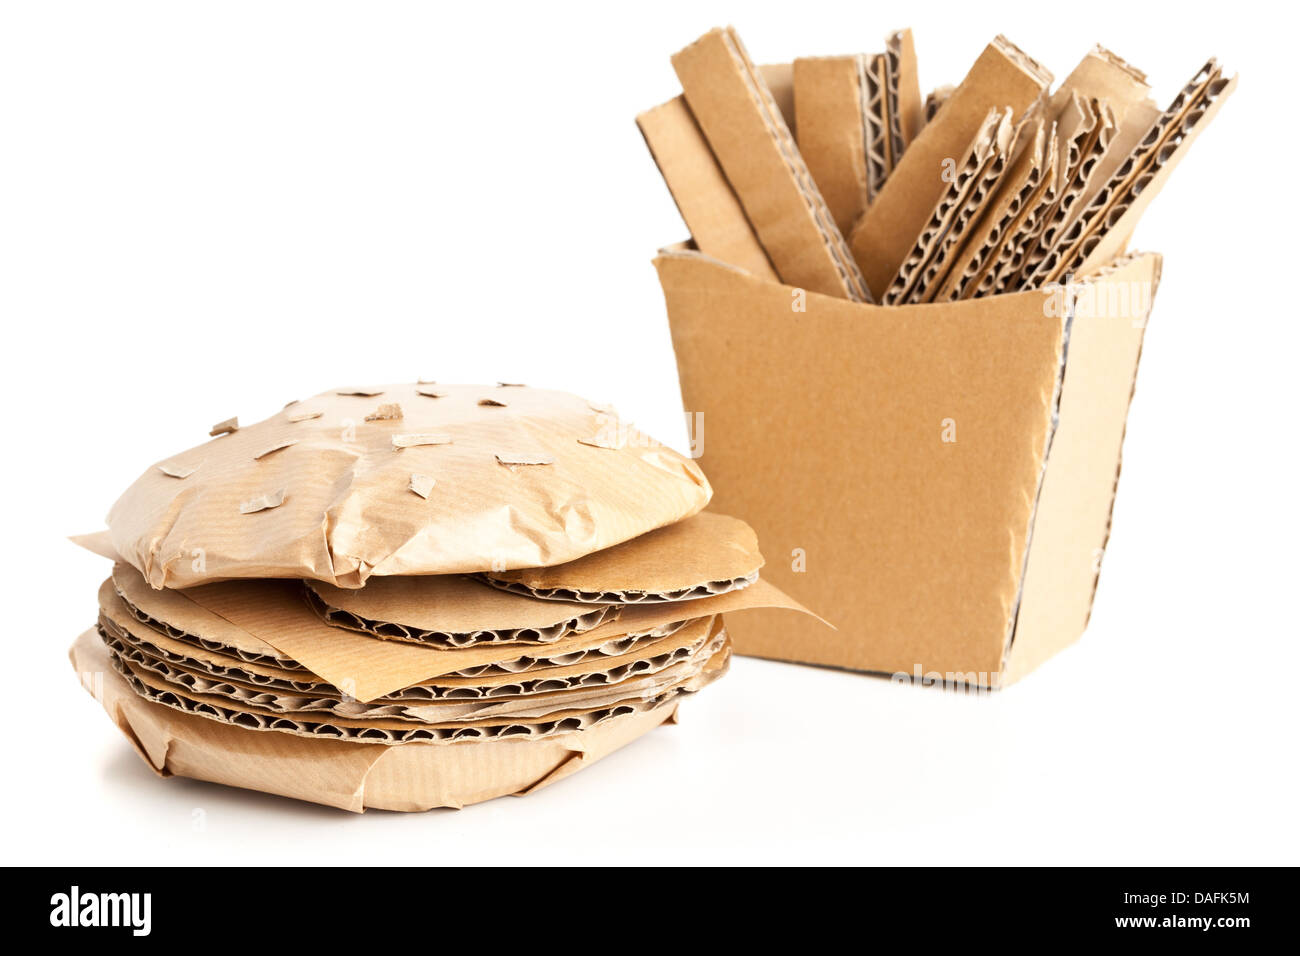 Cheeseburger and french fries made from from cardboard - unhealthy eating or fast food concept Stock Photo